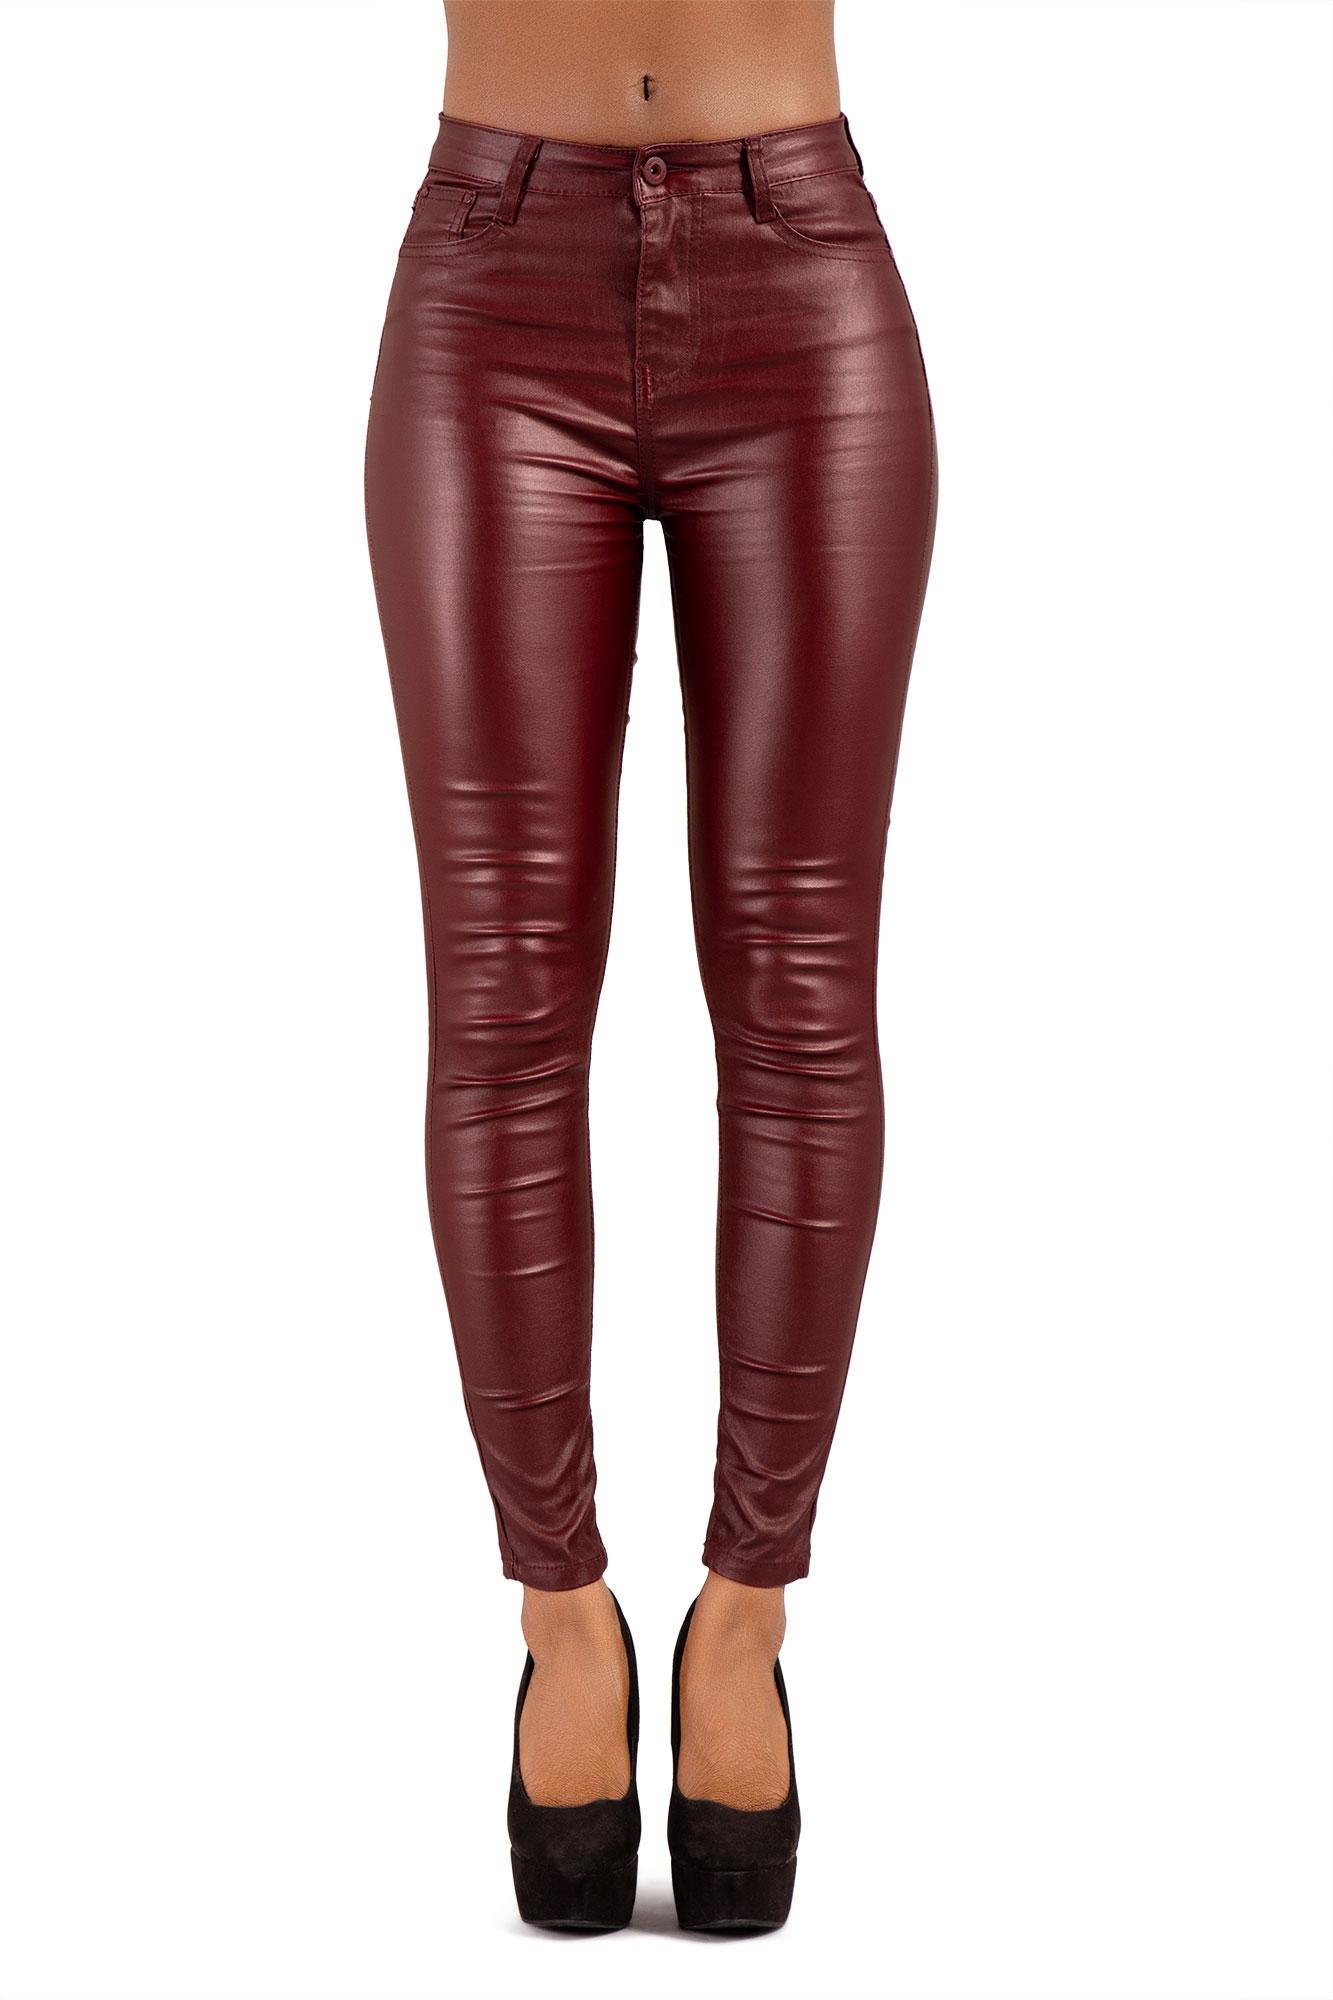 Womens Burgundy Leather Look Trousers Ladies Sexy